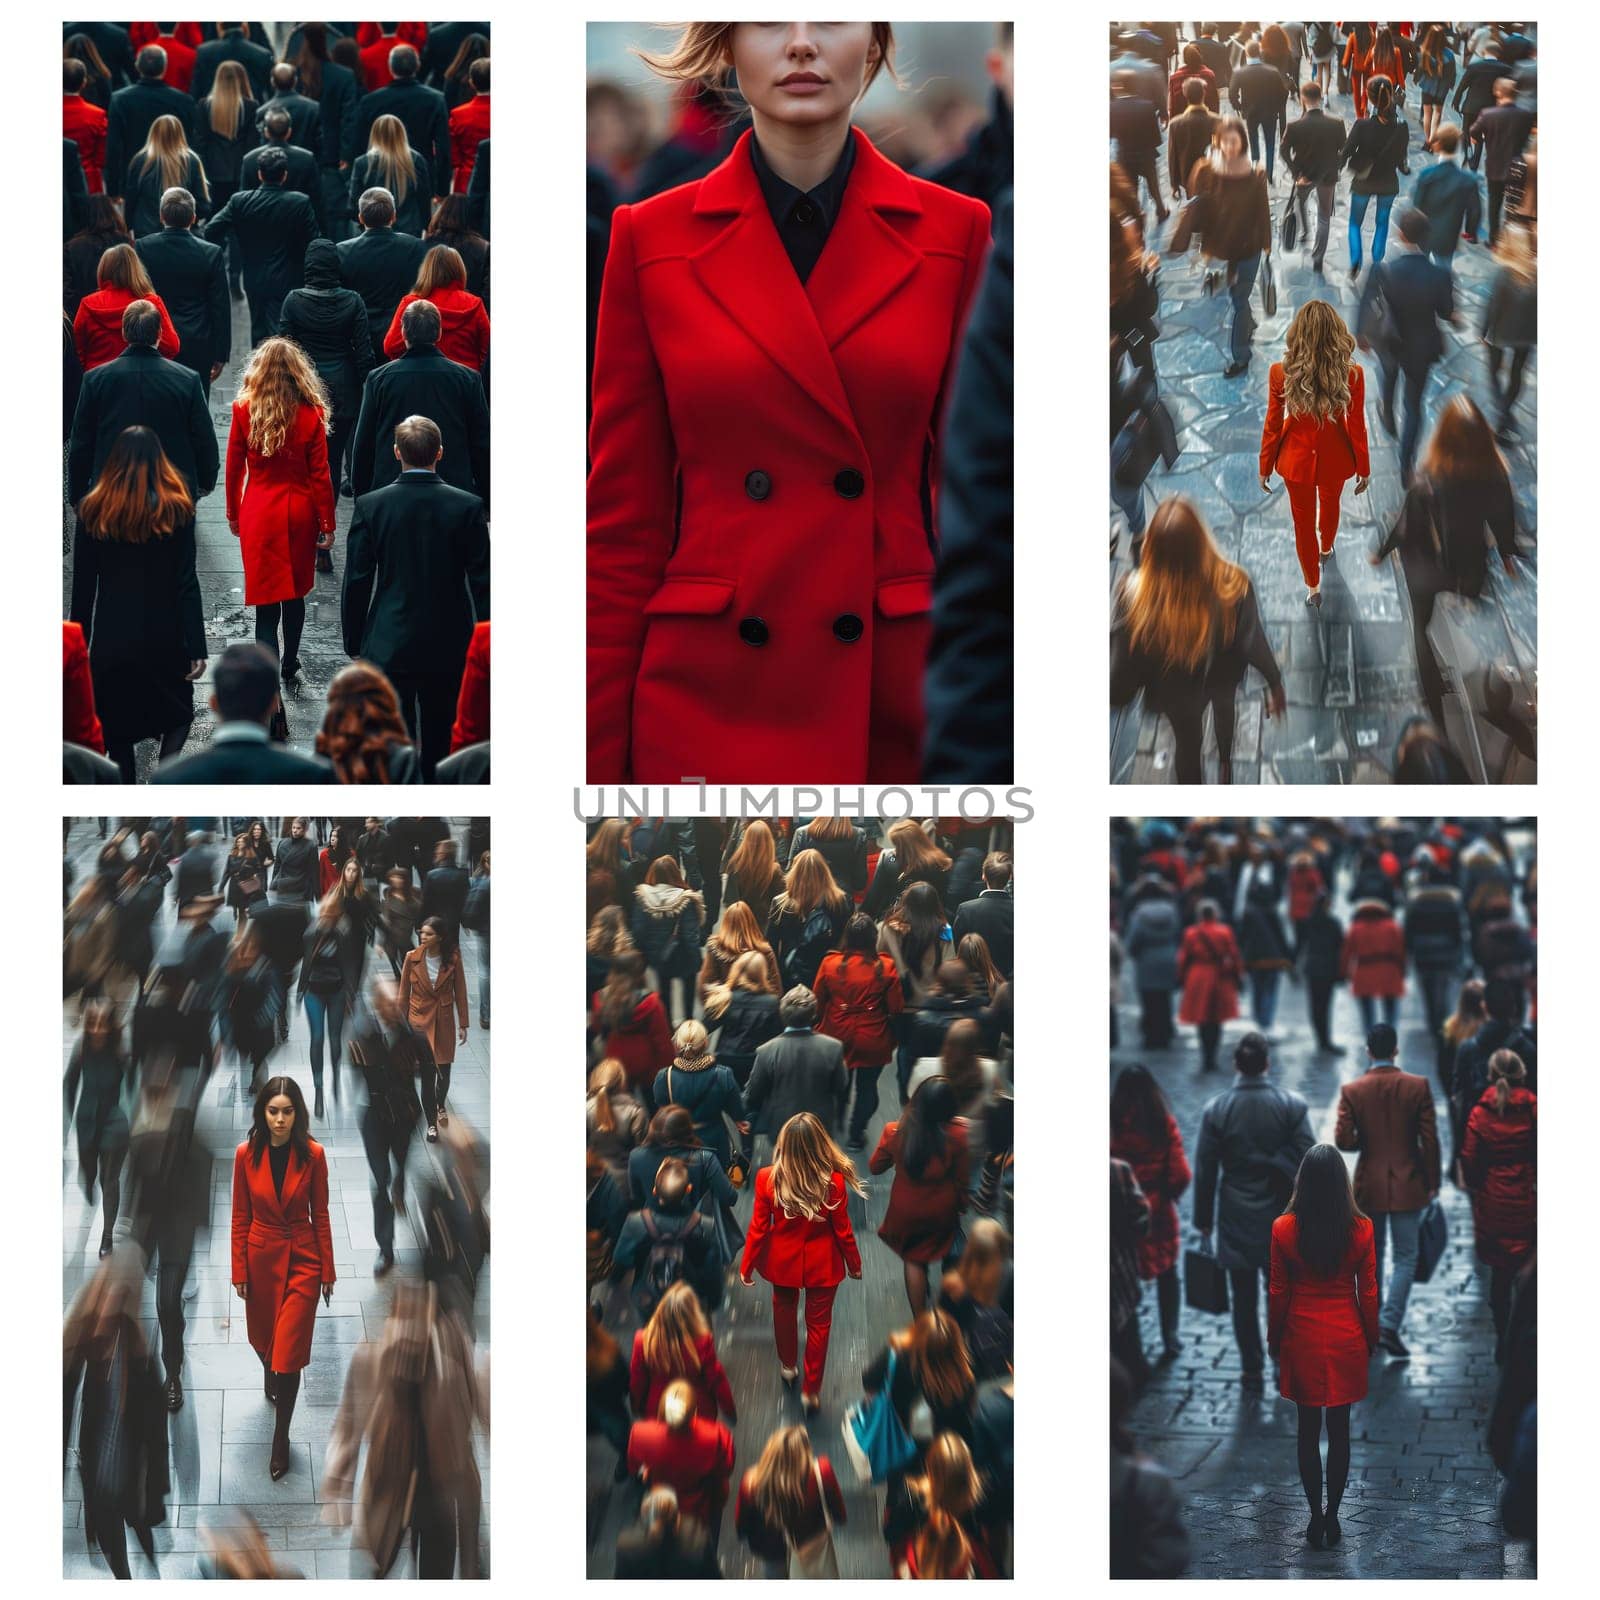 A woman in a red dress walks down a crowded street by itchaznong